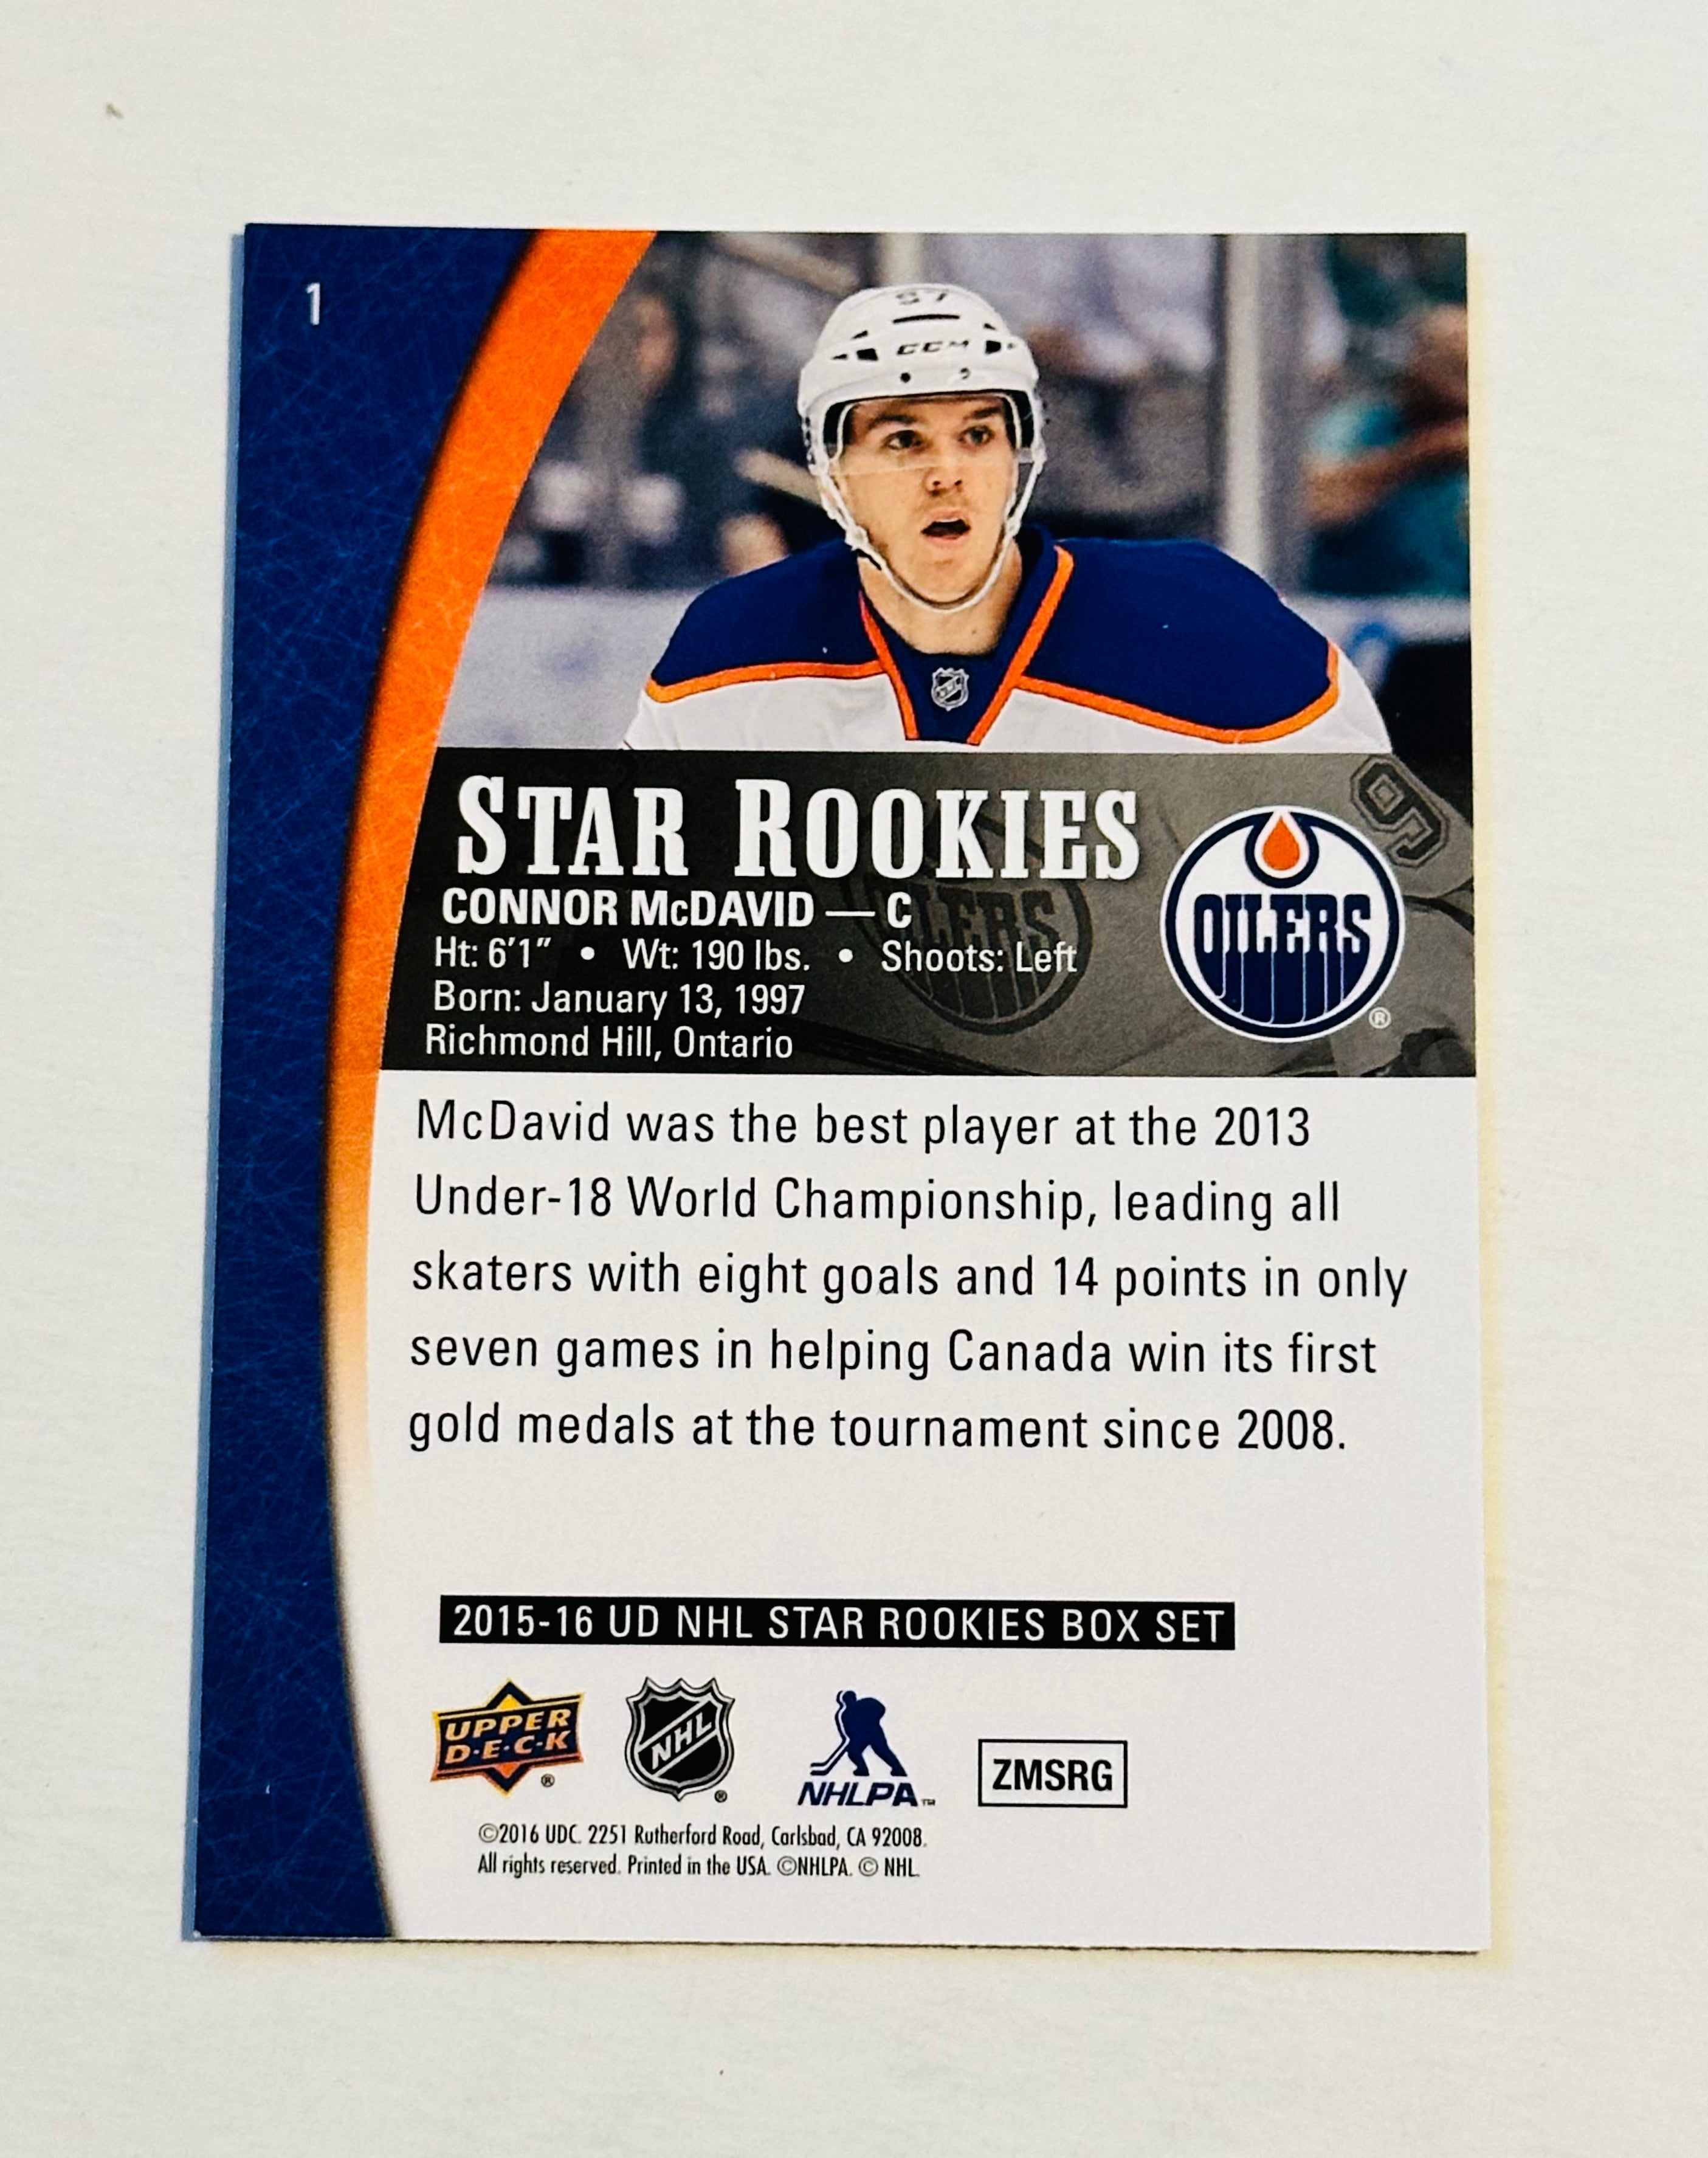 B-Smooth Productions  Graded Sports Card Retailer